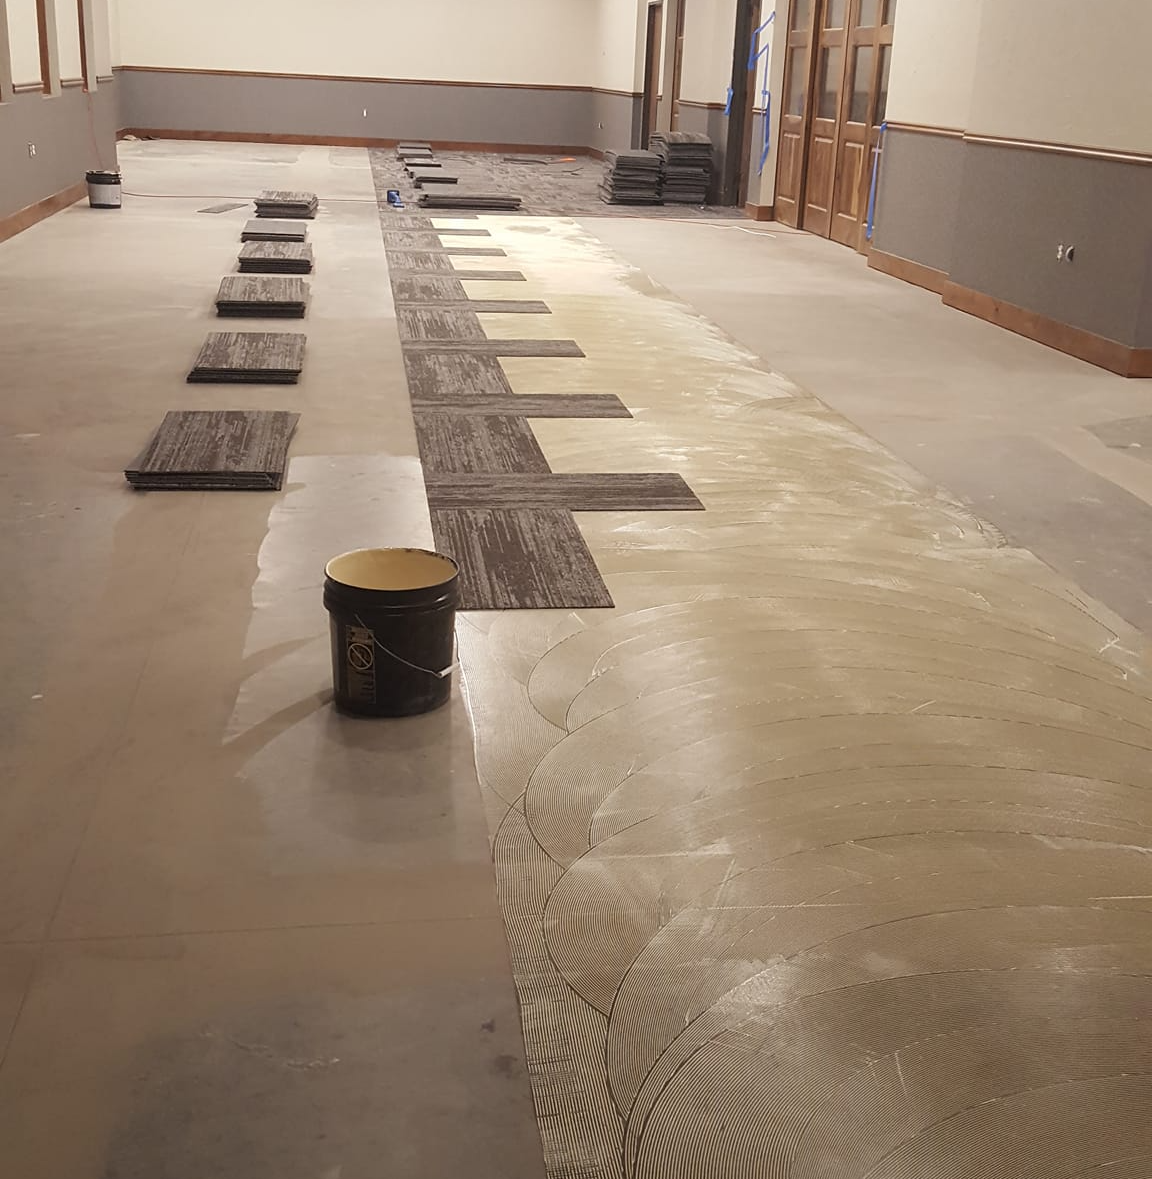 The subfloor is being prepared for this carpet tile installation with the right amount of adhesive applied.